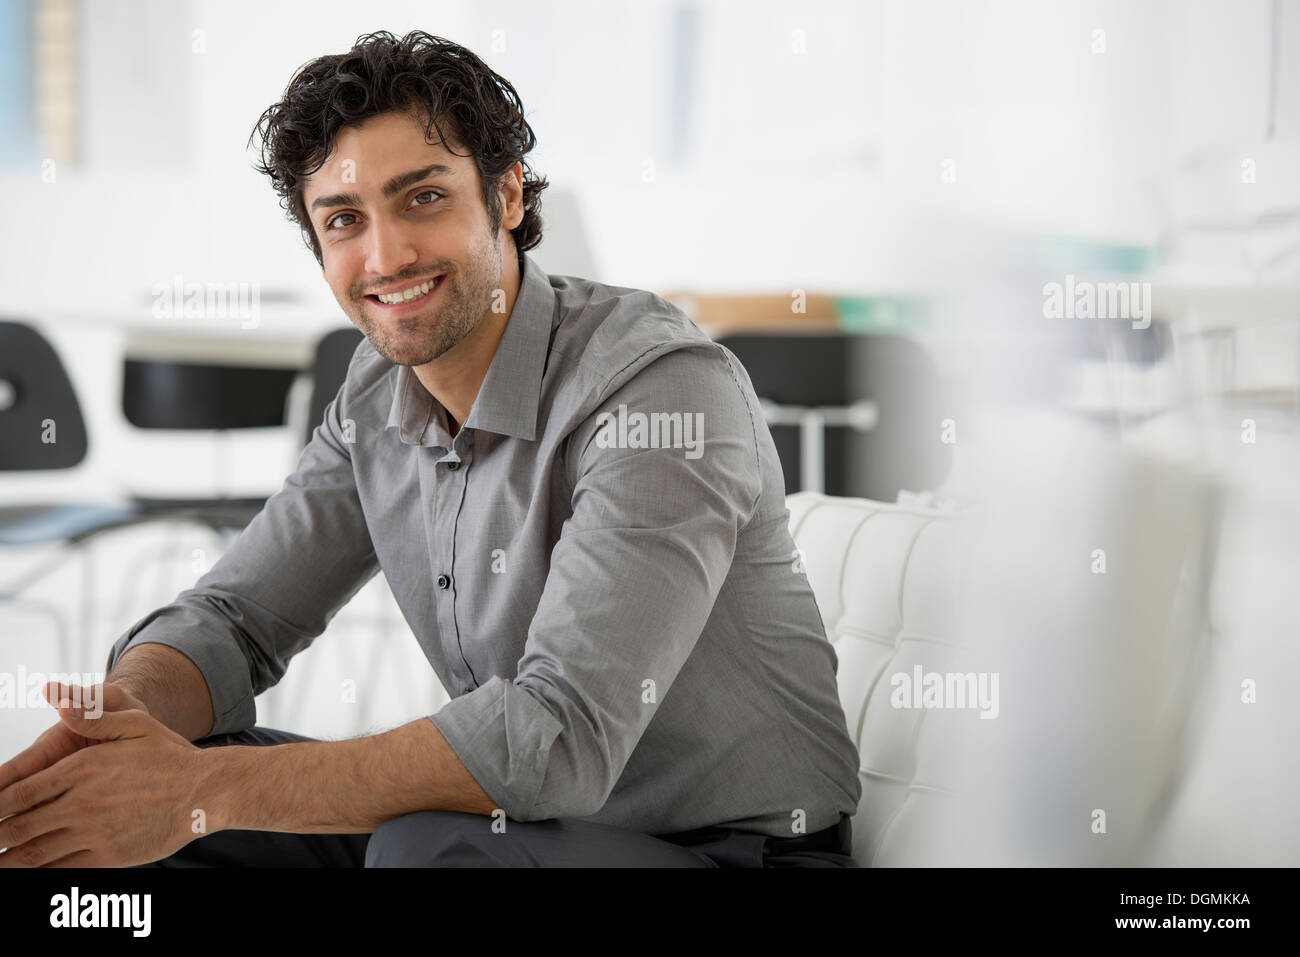 Business. A man seated with his hands clasped in a relaxed pose. Smiling and leaning forwards. Stock Photo